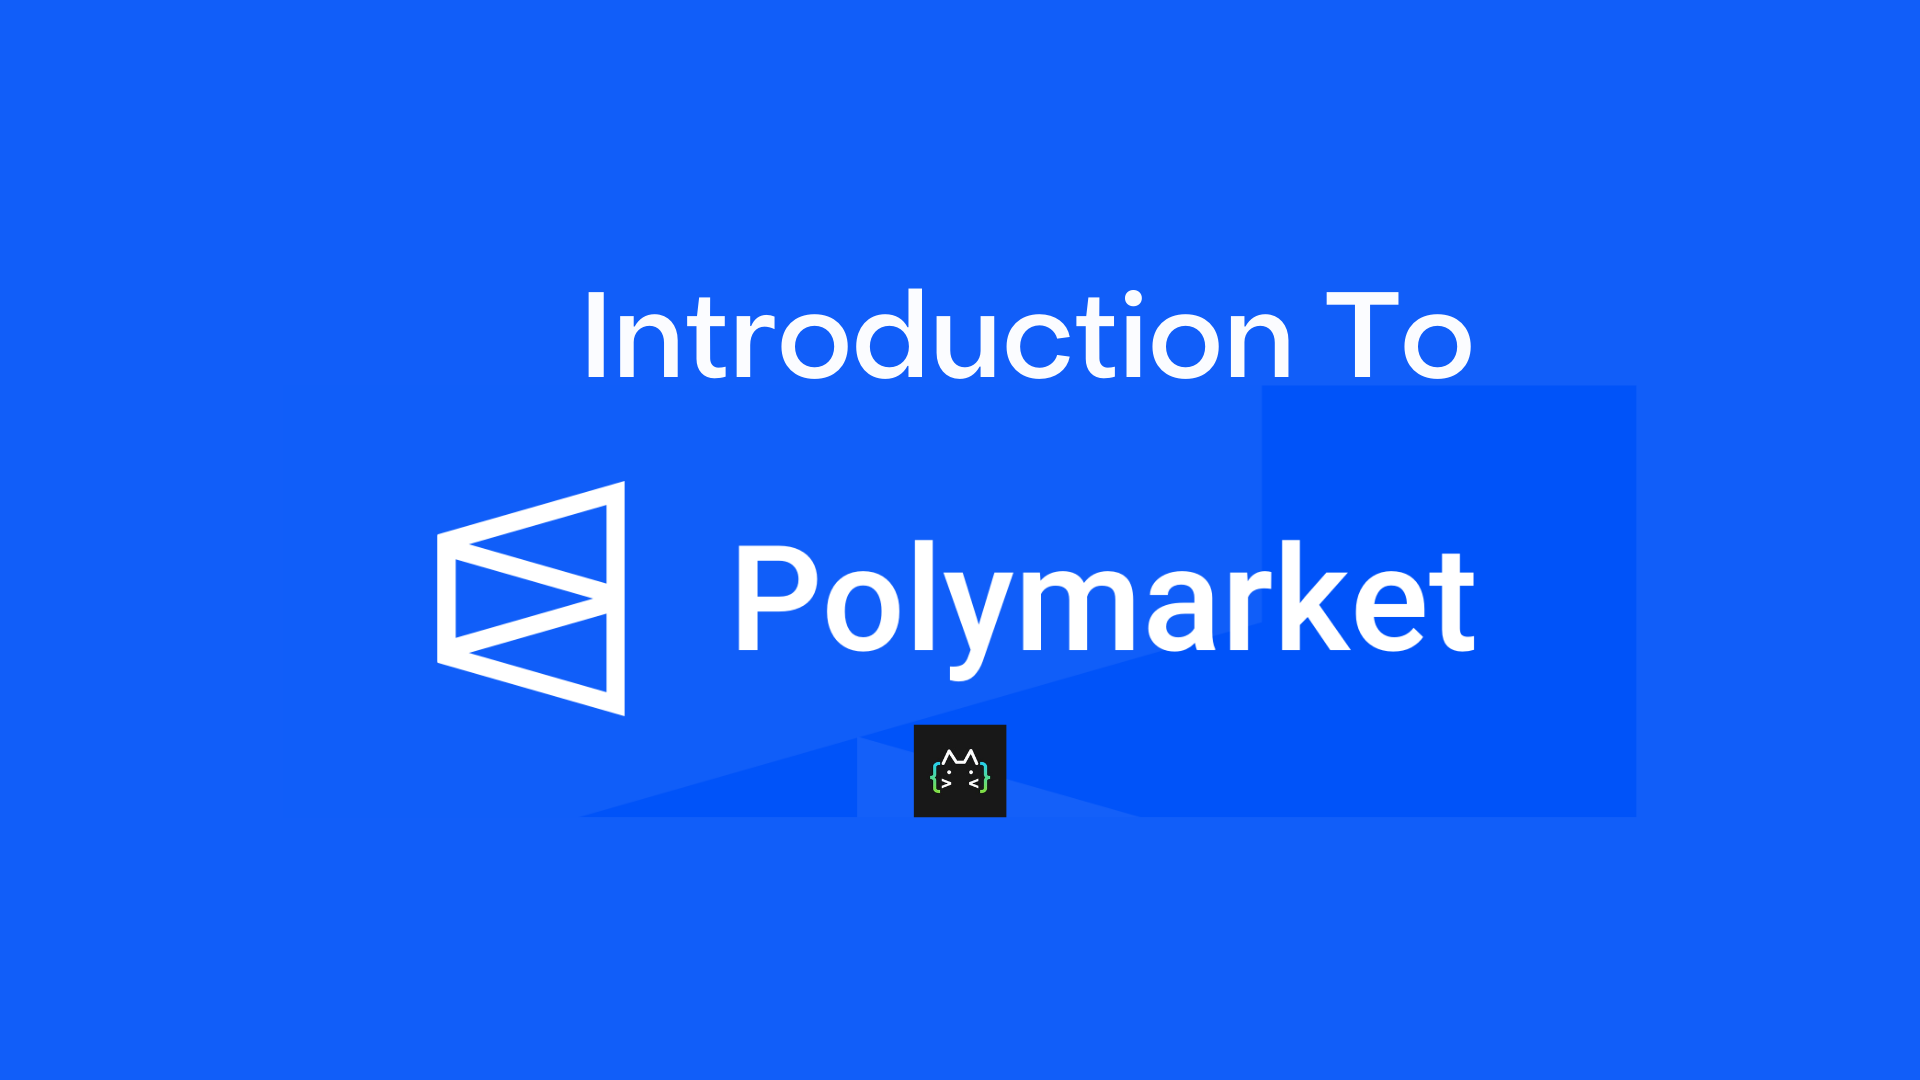 Introduction To Polymarket